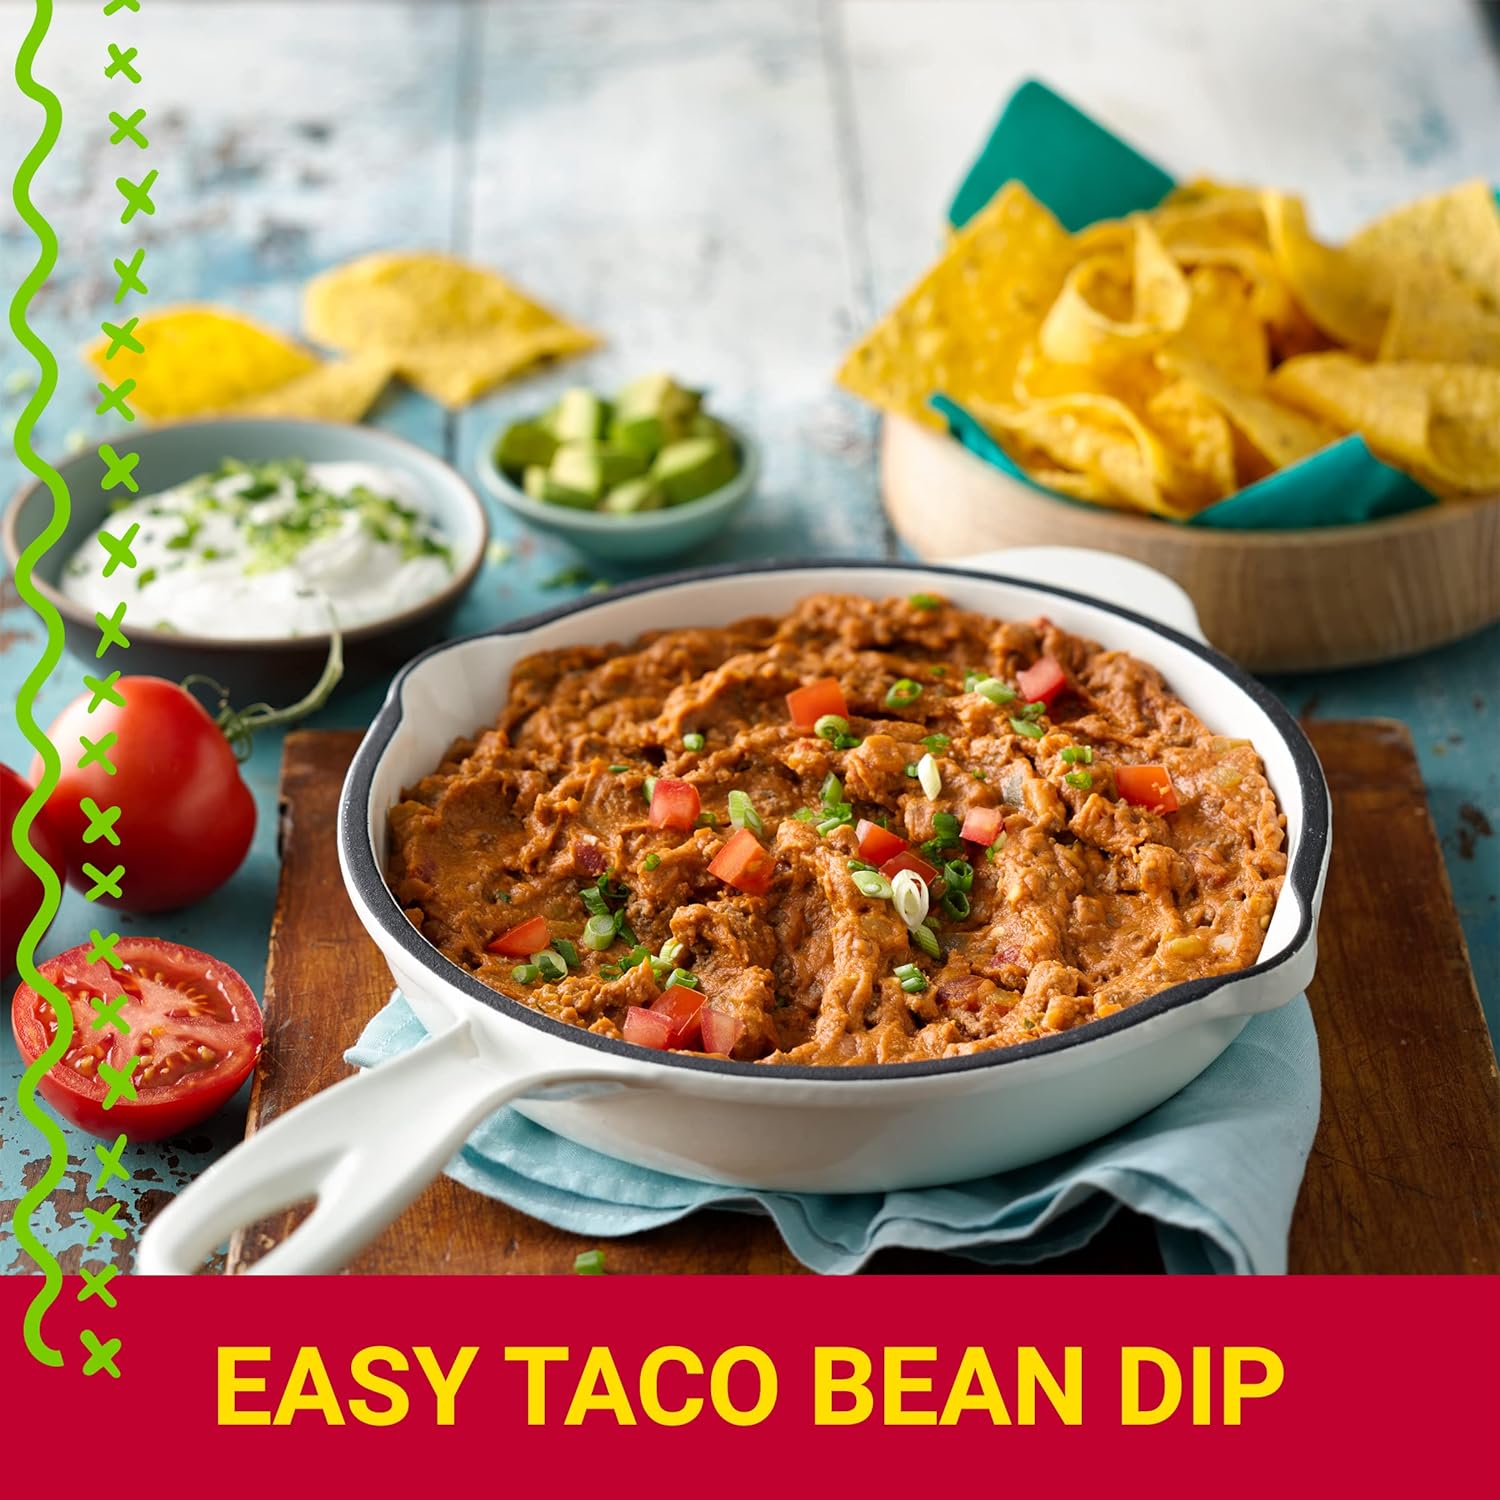 Old El Paso Traditional Canned Refried Beans, 16 oz. : Grocery & Gourmet Food